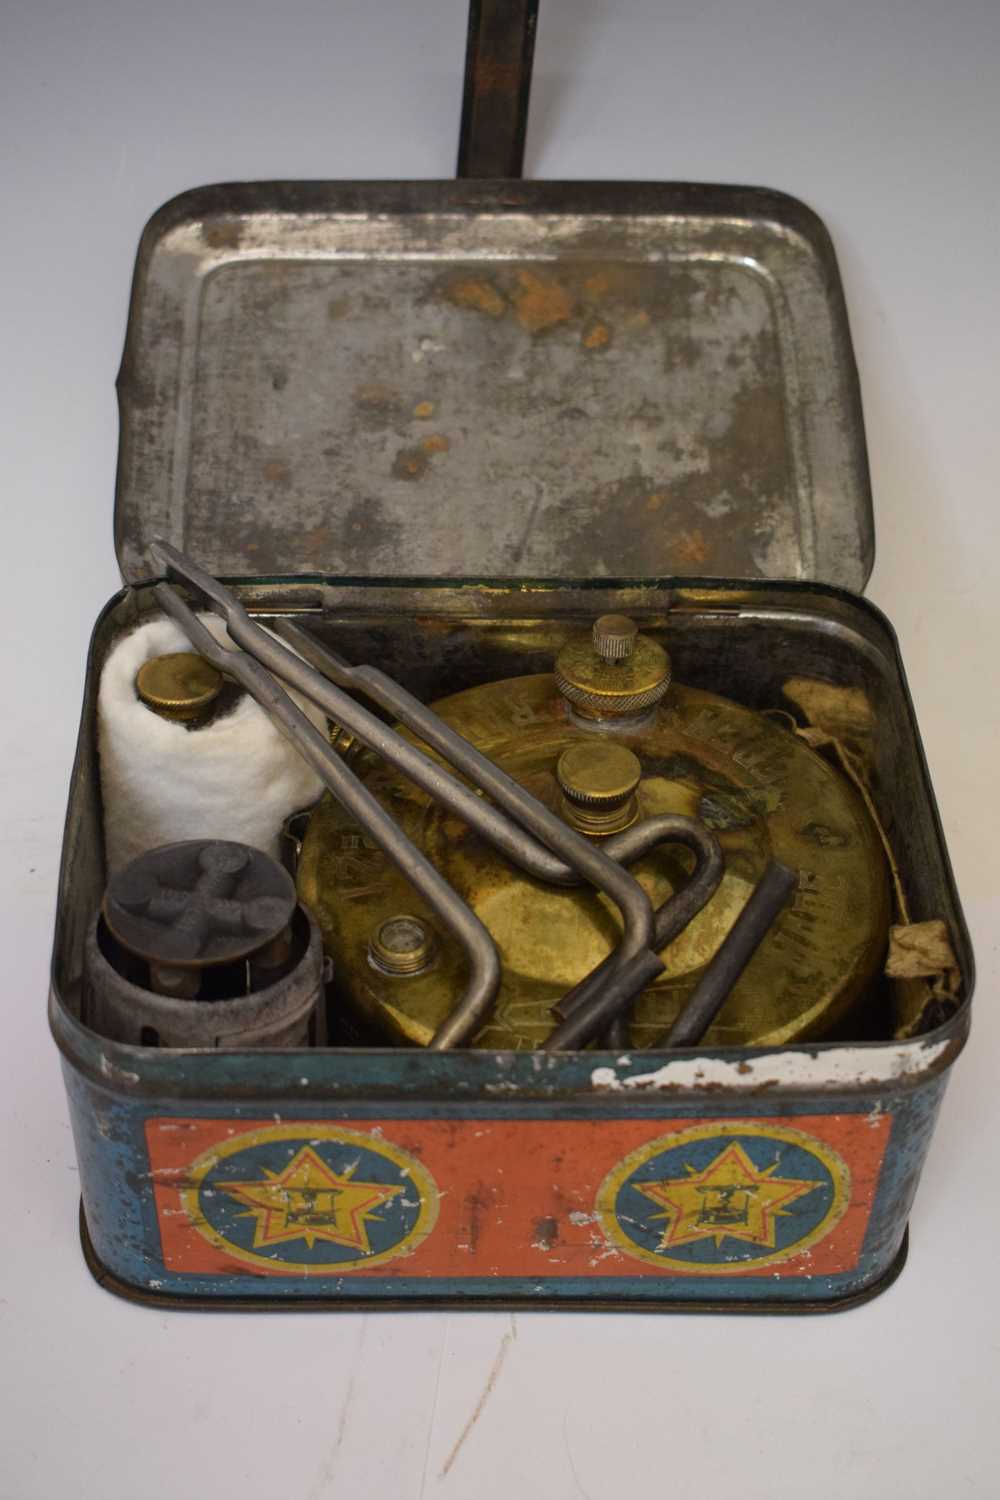 'Radius' Primus stove, together with advertising tins - Image 6 of 8